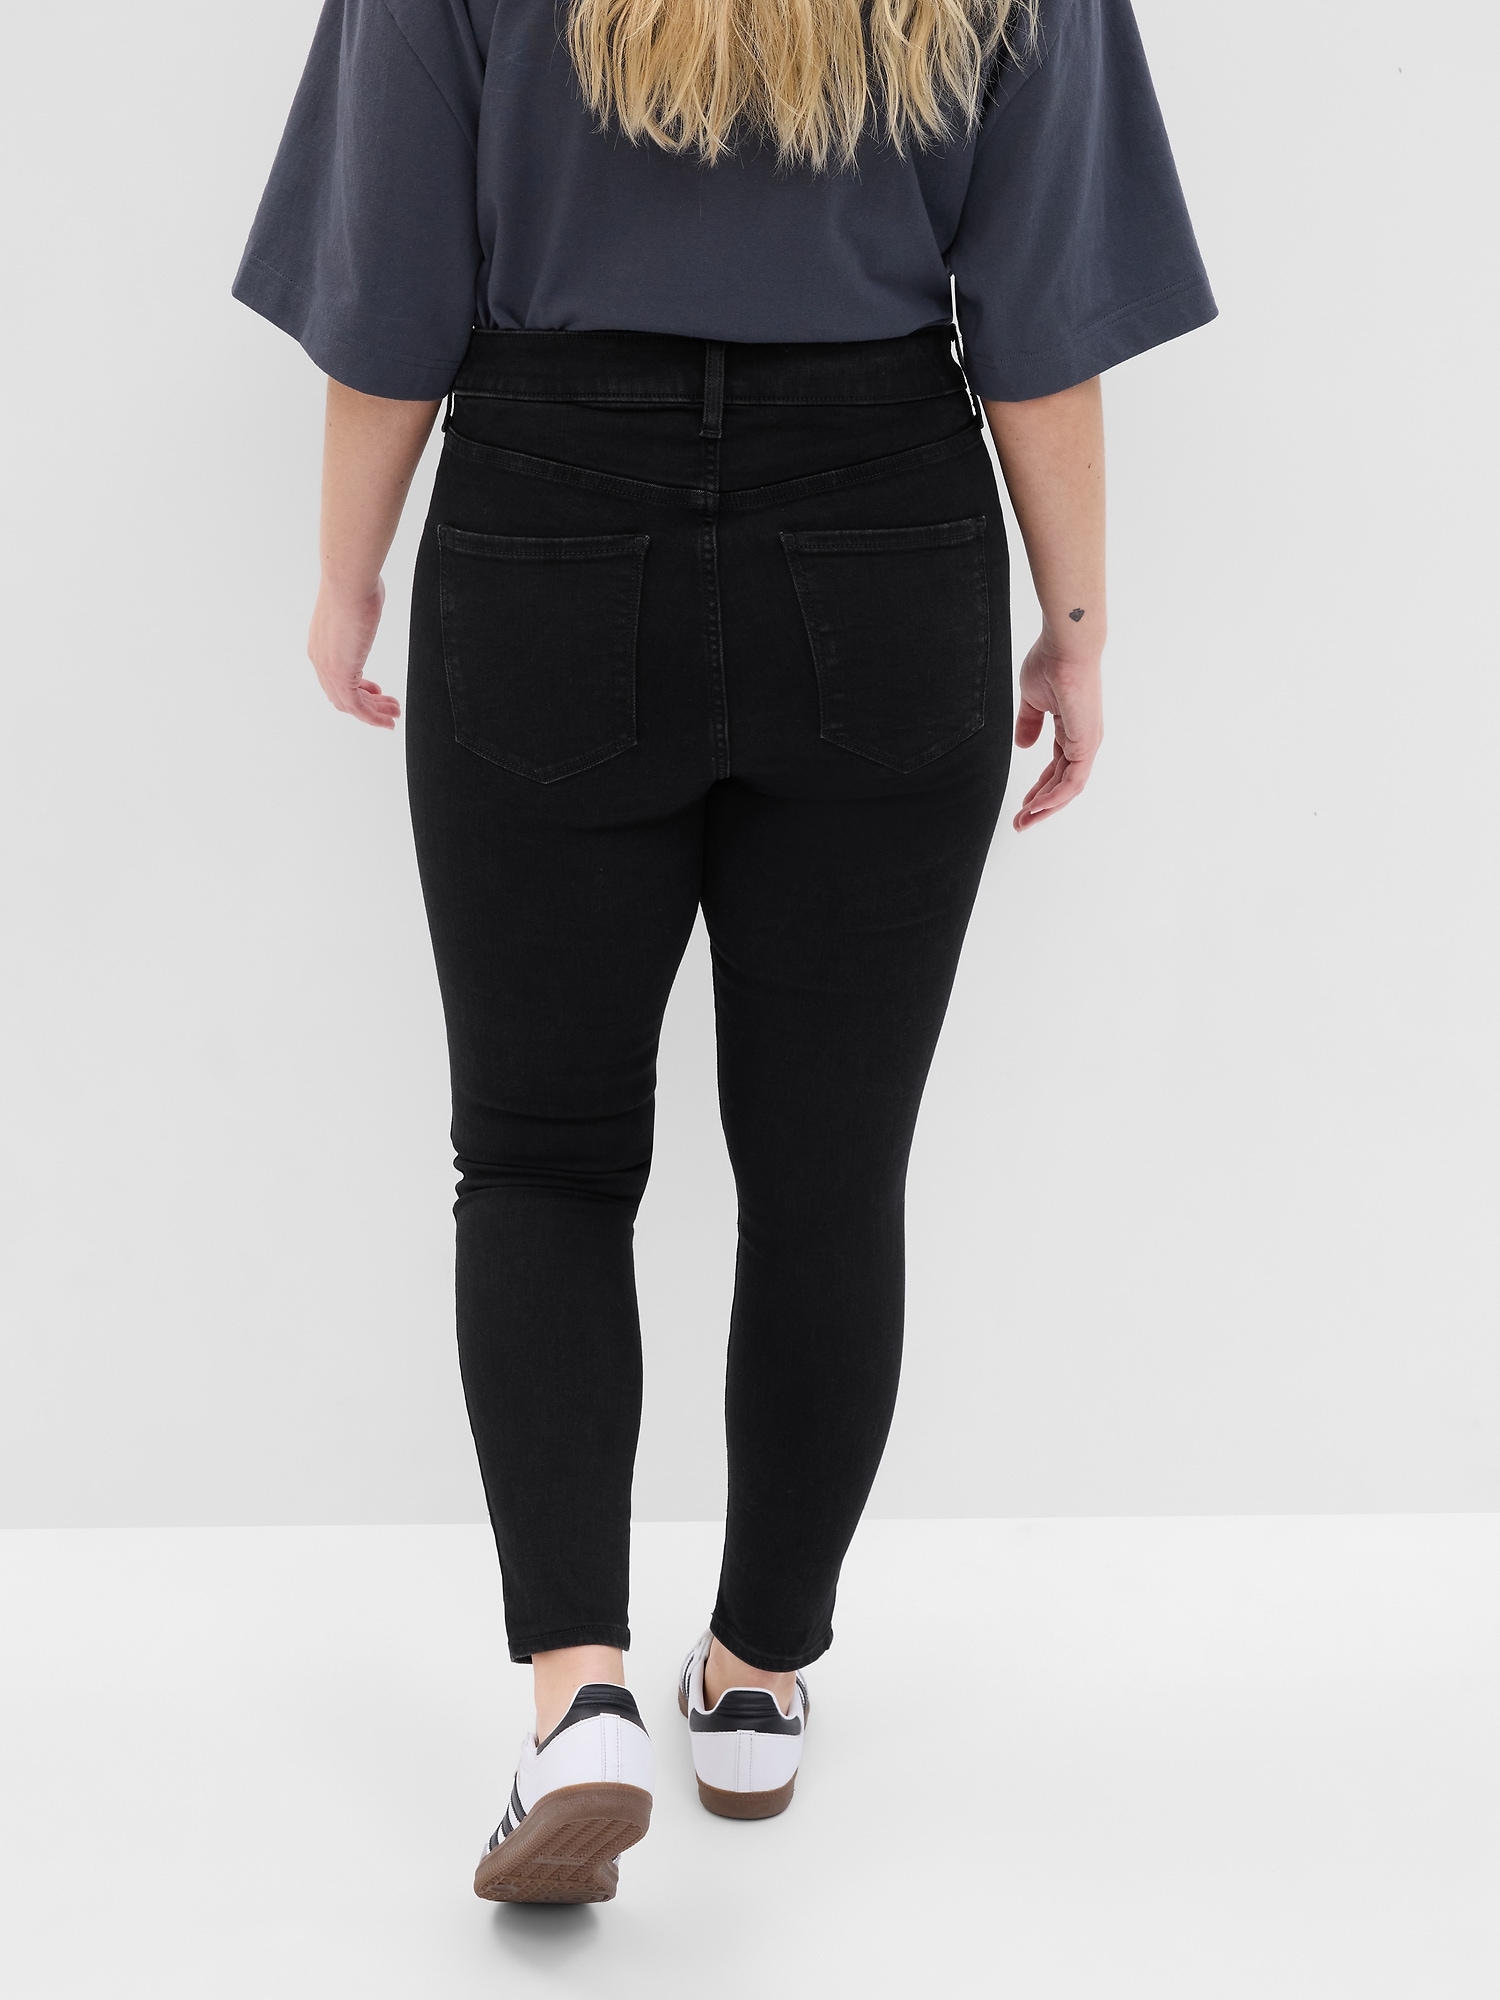 GAP, Jeans, Gap Black Mid Rise Universal Legging Jeans With Washwell